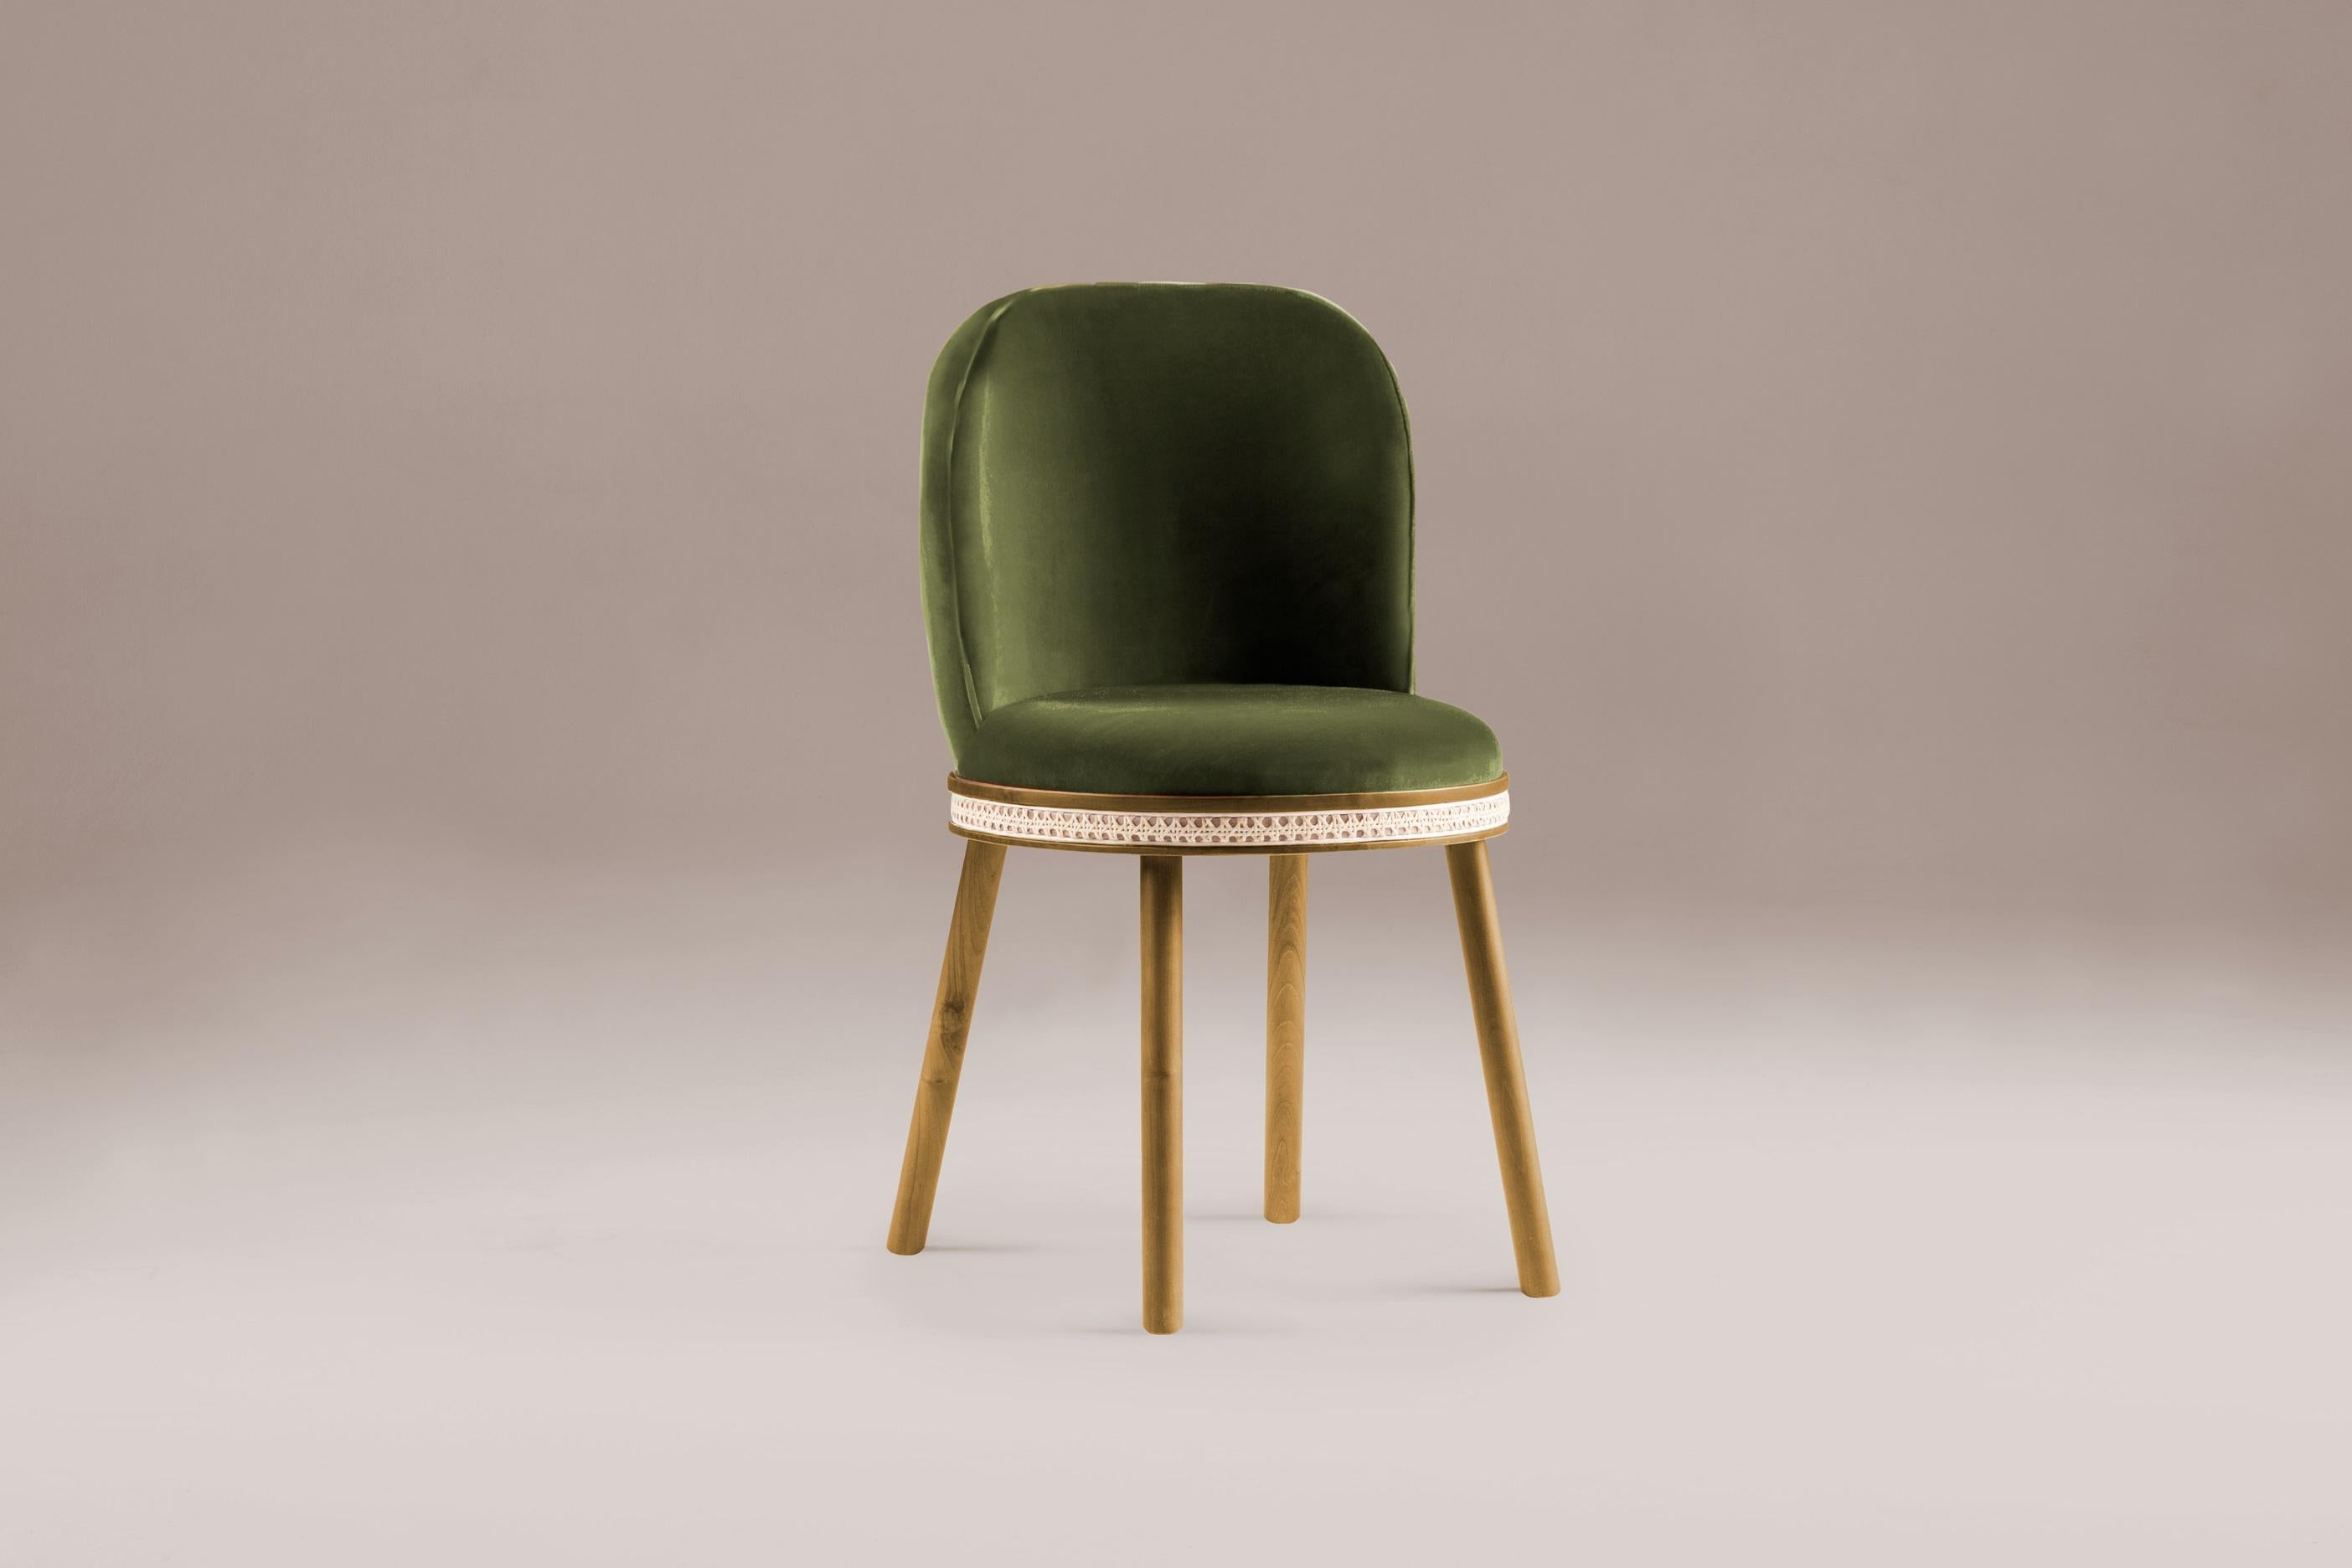 DOOQ Mid-Century Modern Dining Chair Alma with Dark Green Velvet and Walnut Wood
In a piece that combines classic and modern aesthetics we can find a certain harmonic gracefulness paired with an intimate voluptuousness that can embrace you and